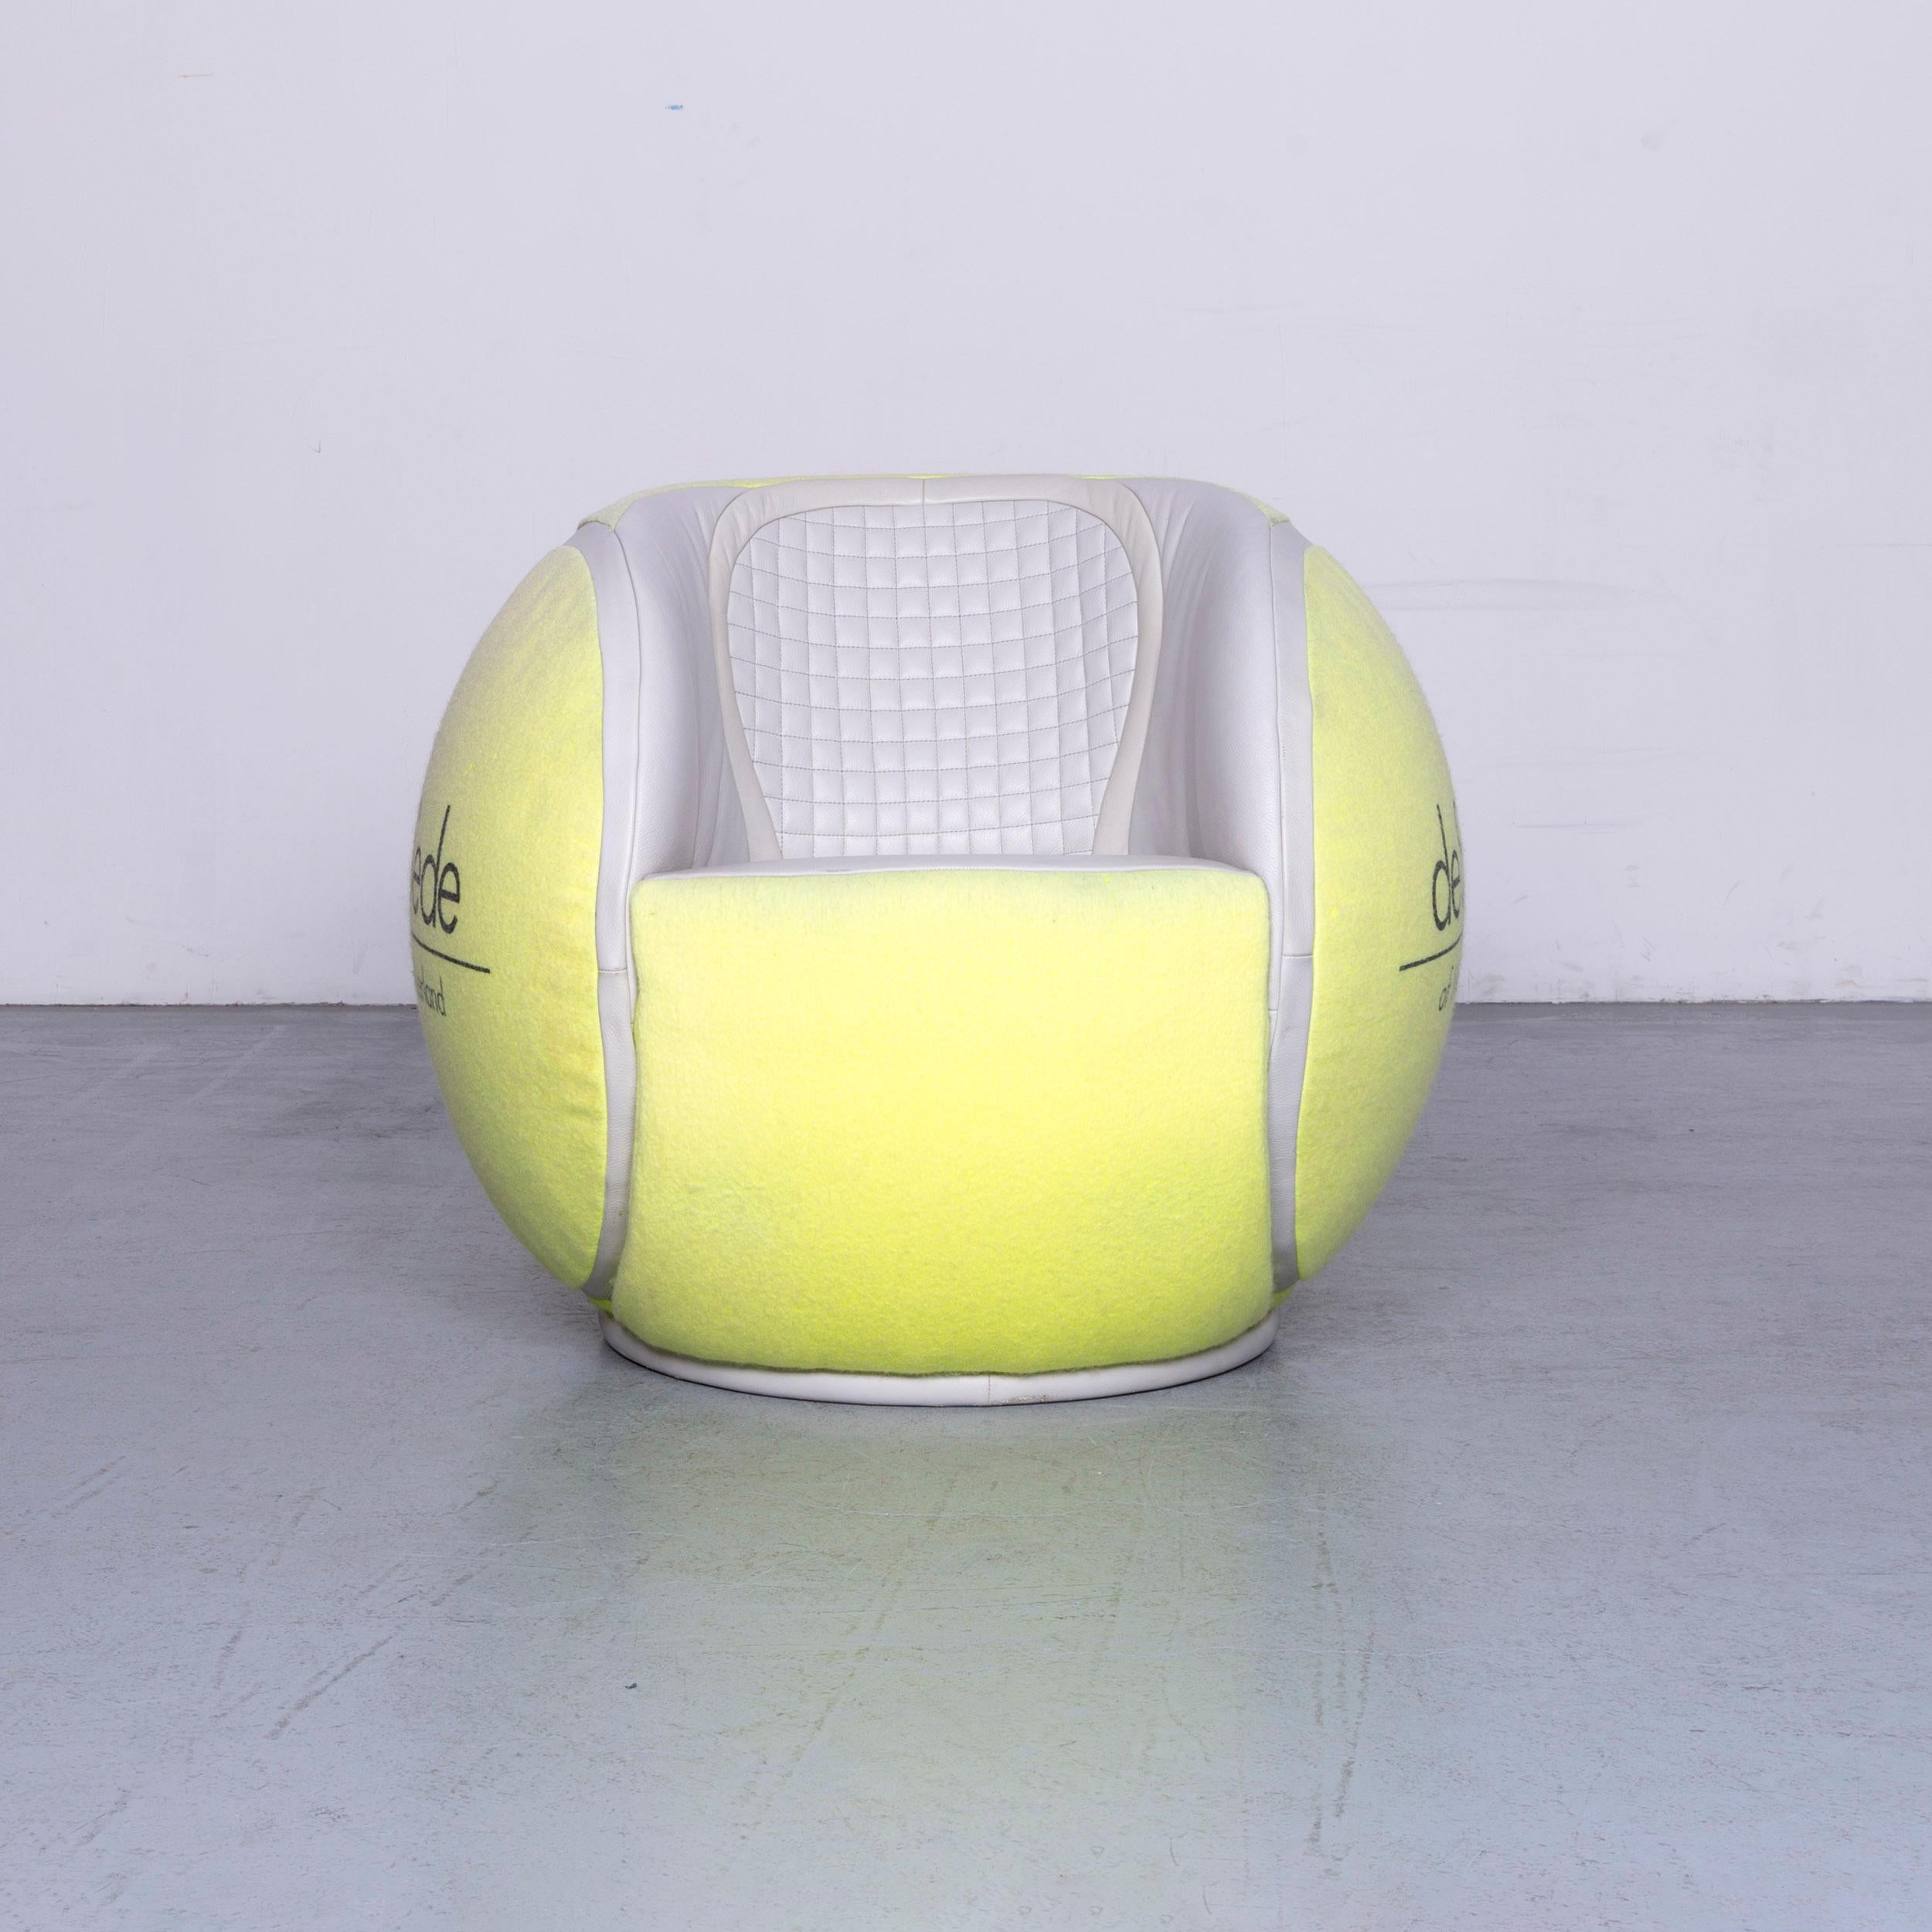 We bring to you a De Sede tennis ball designer leather armchair yellow real leather fabric chair.

Product measurements in centimeters:

Depth 86
Width 86
Height 75
Seat-height 45
Rest-height 73
Seat-depth 52
Seat-width